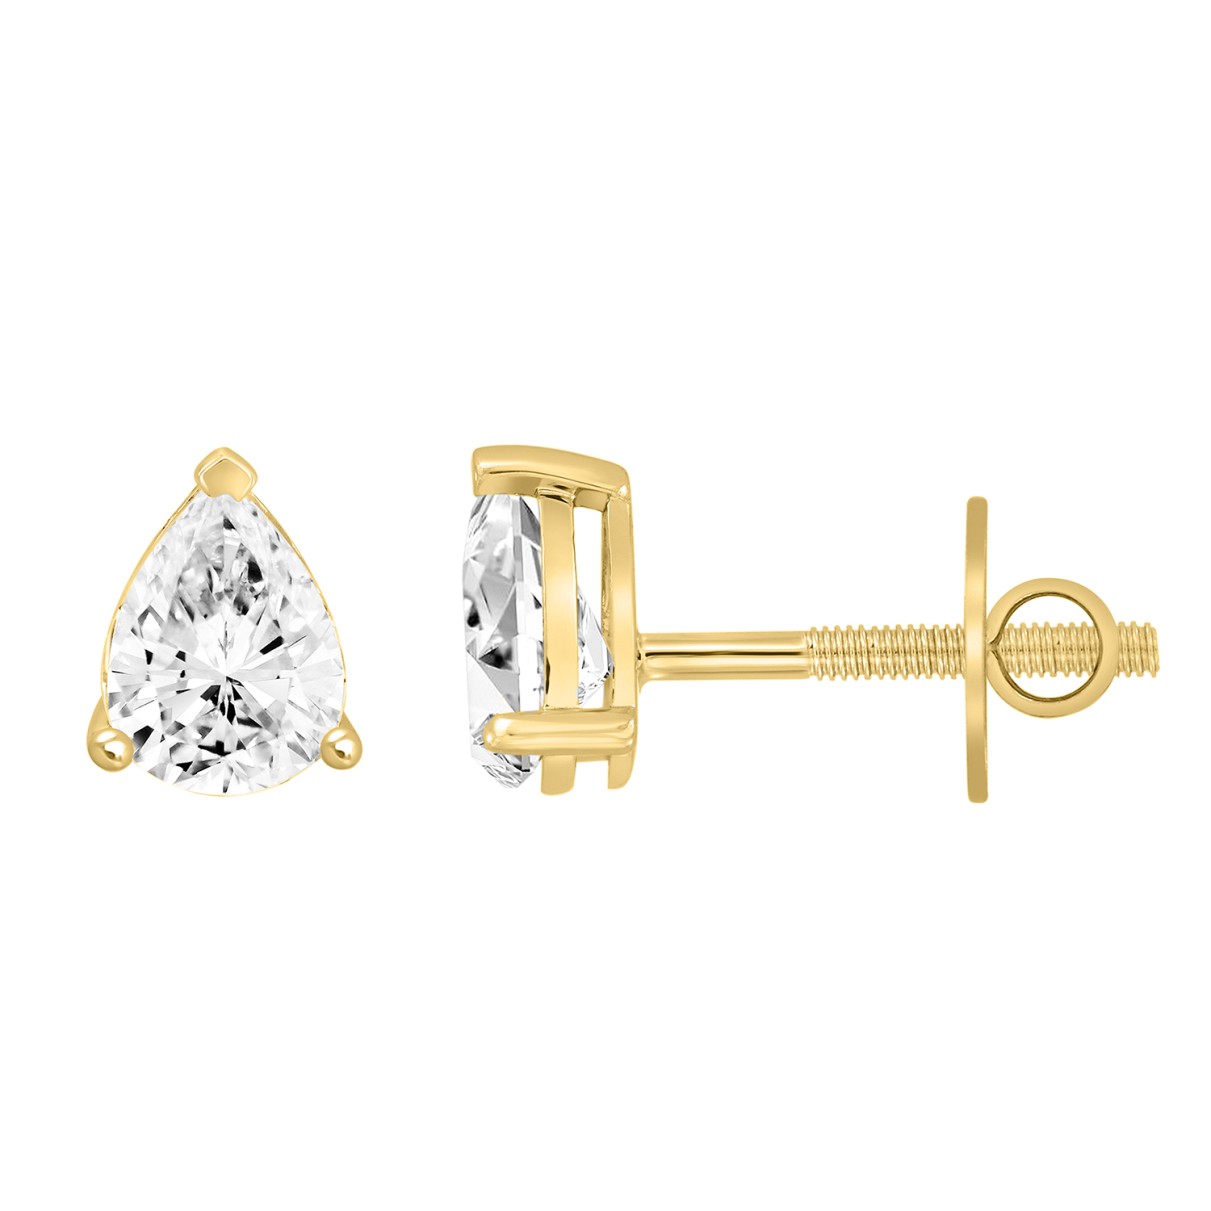 LADIES SOLITAIRE EARRINGS 1/2CT PEAR DIAMOND 14K YELLOW GOLD